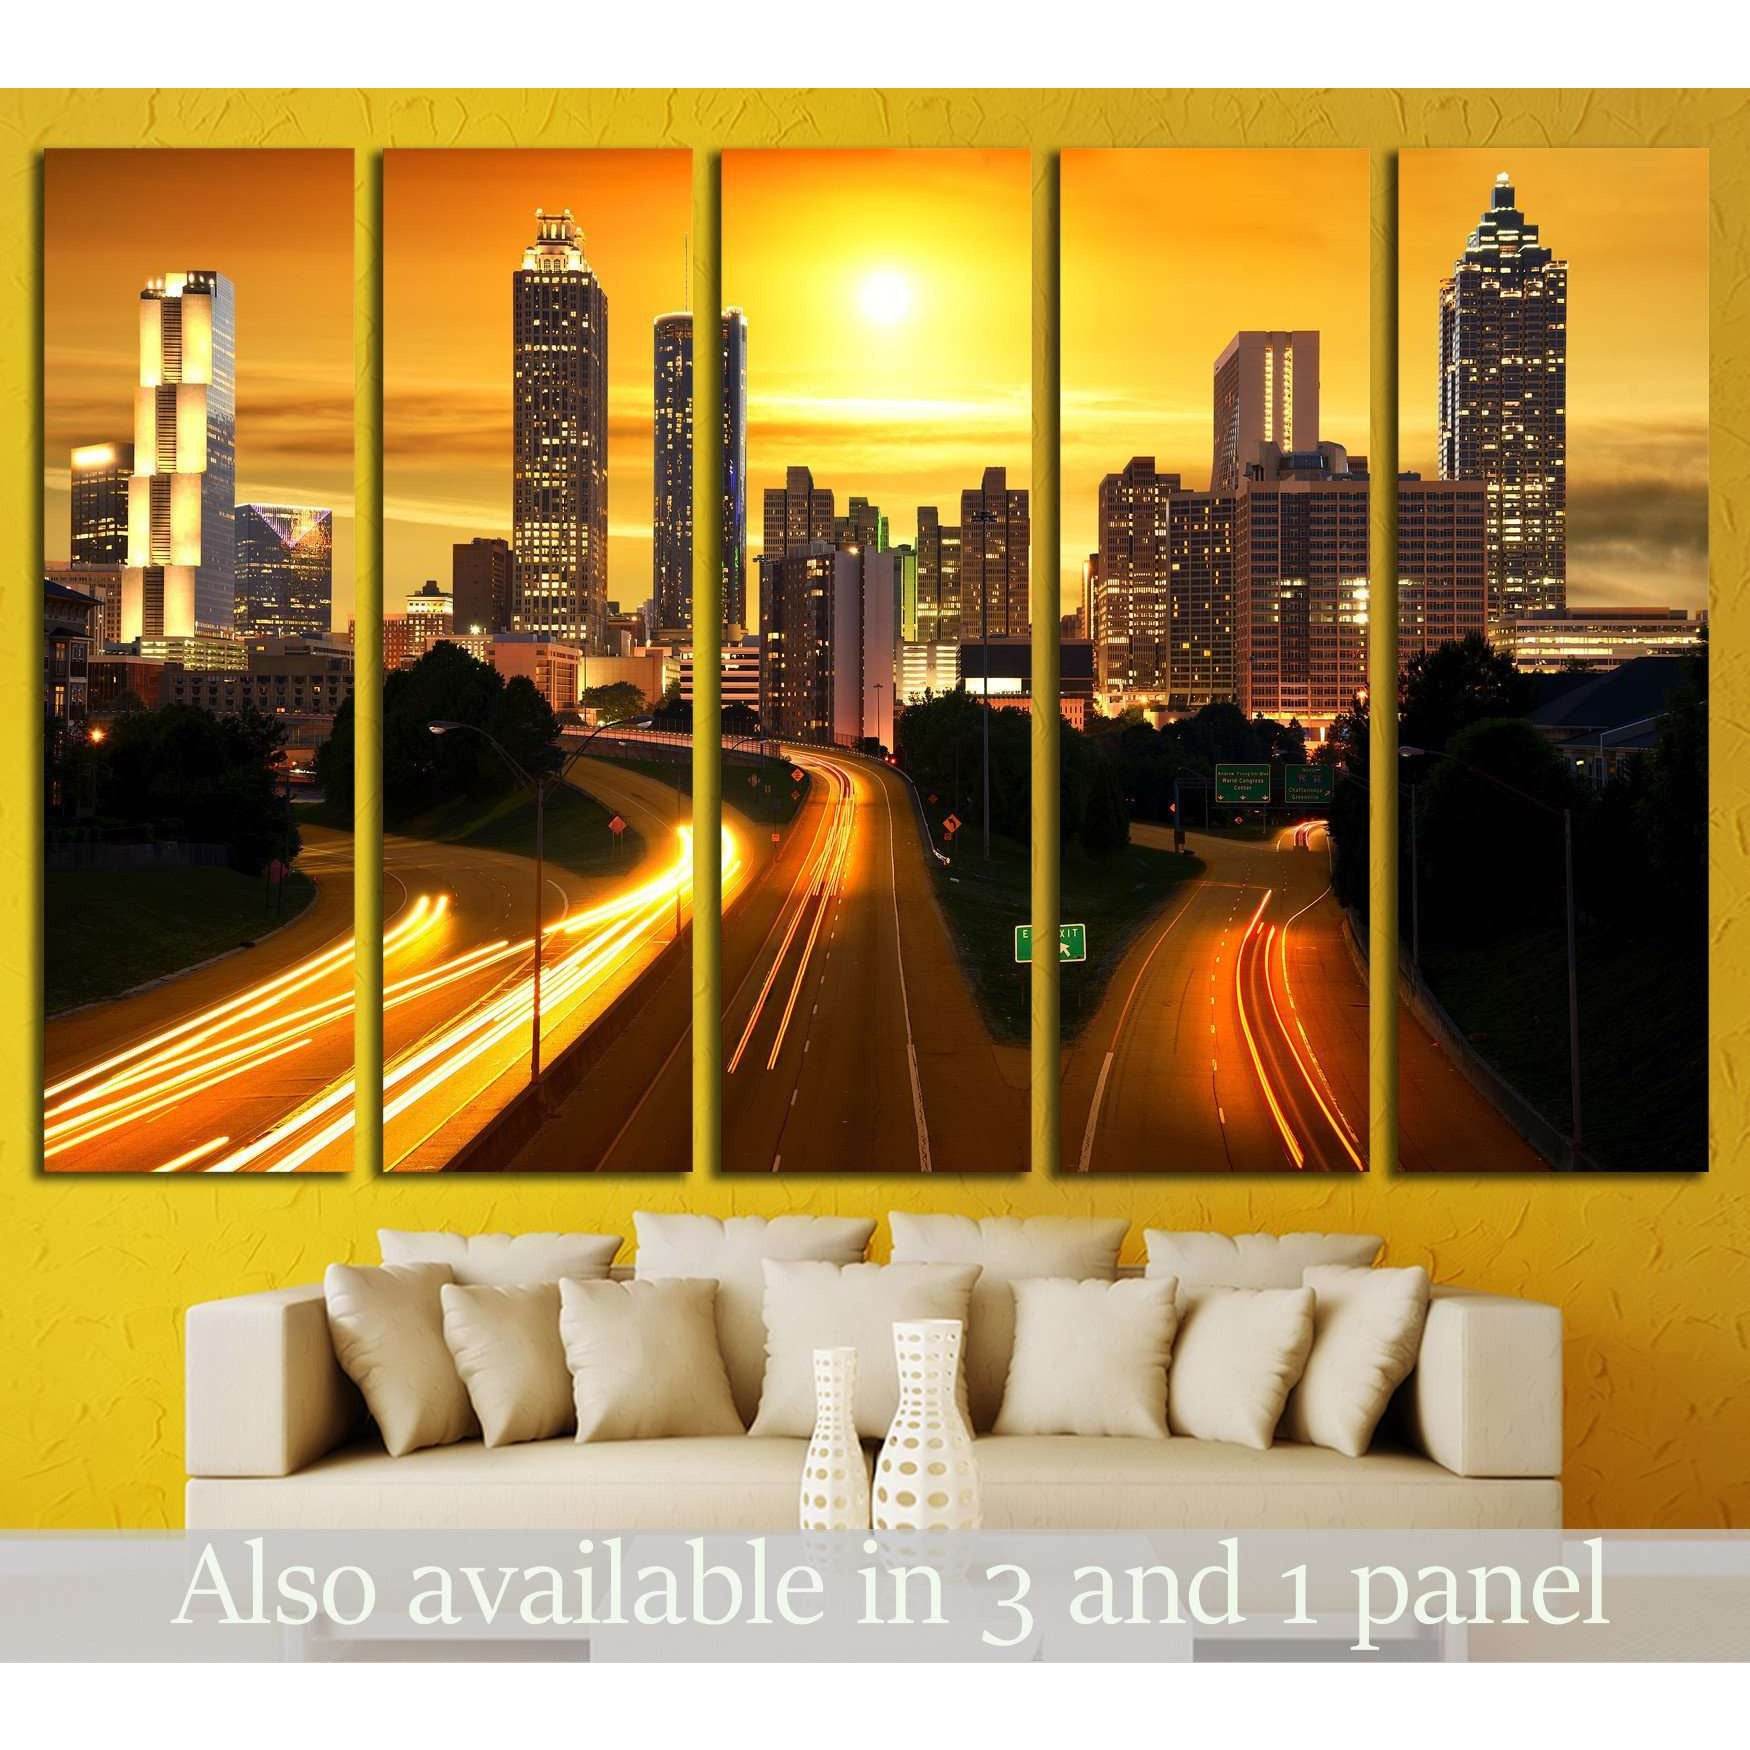 Sunset in Atlanta, United States №1651 Ready to Hang Canvas Print